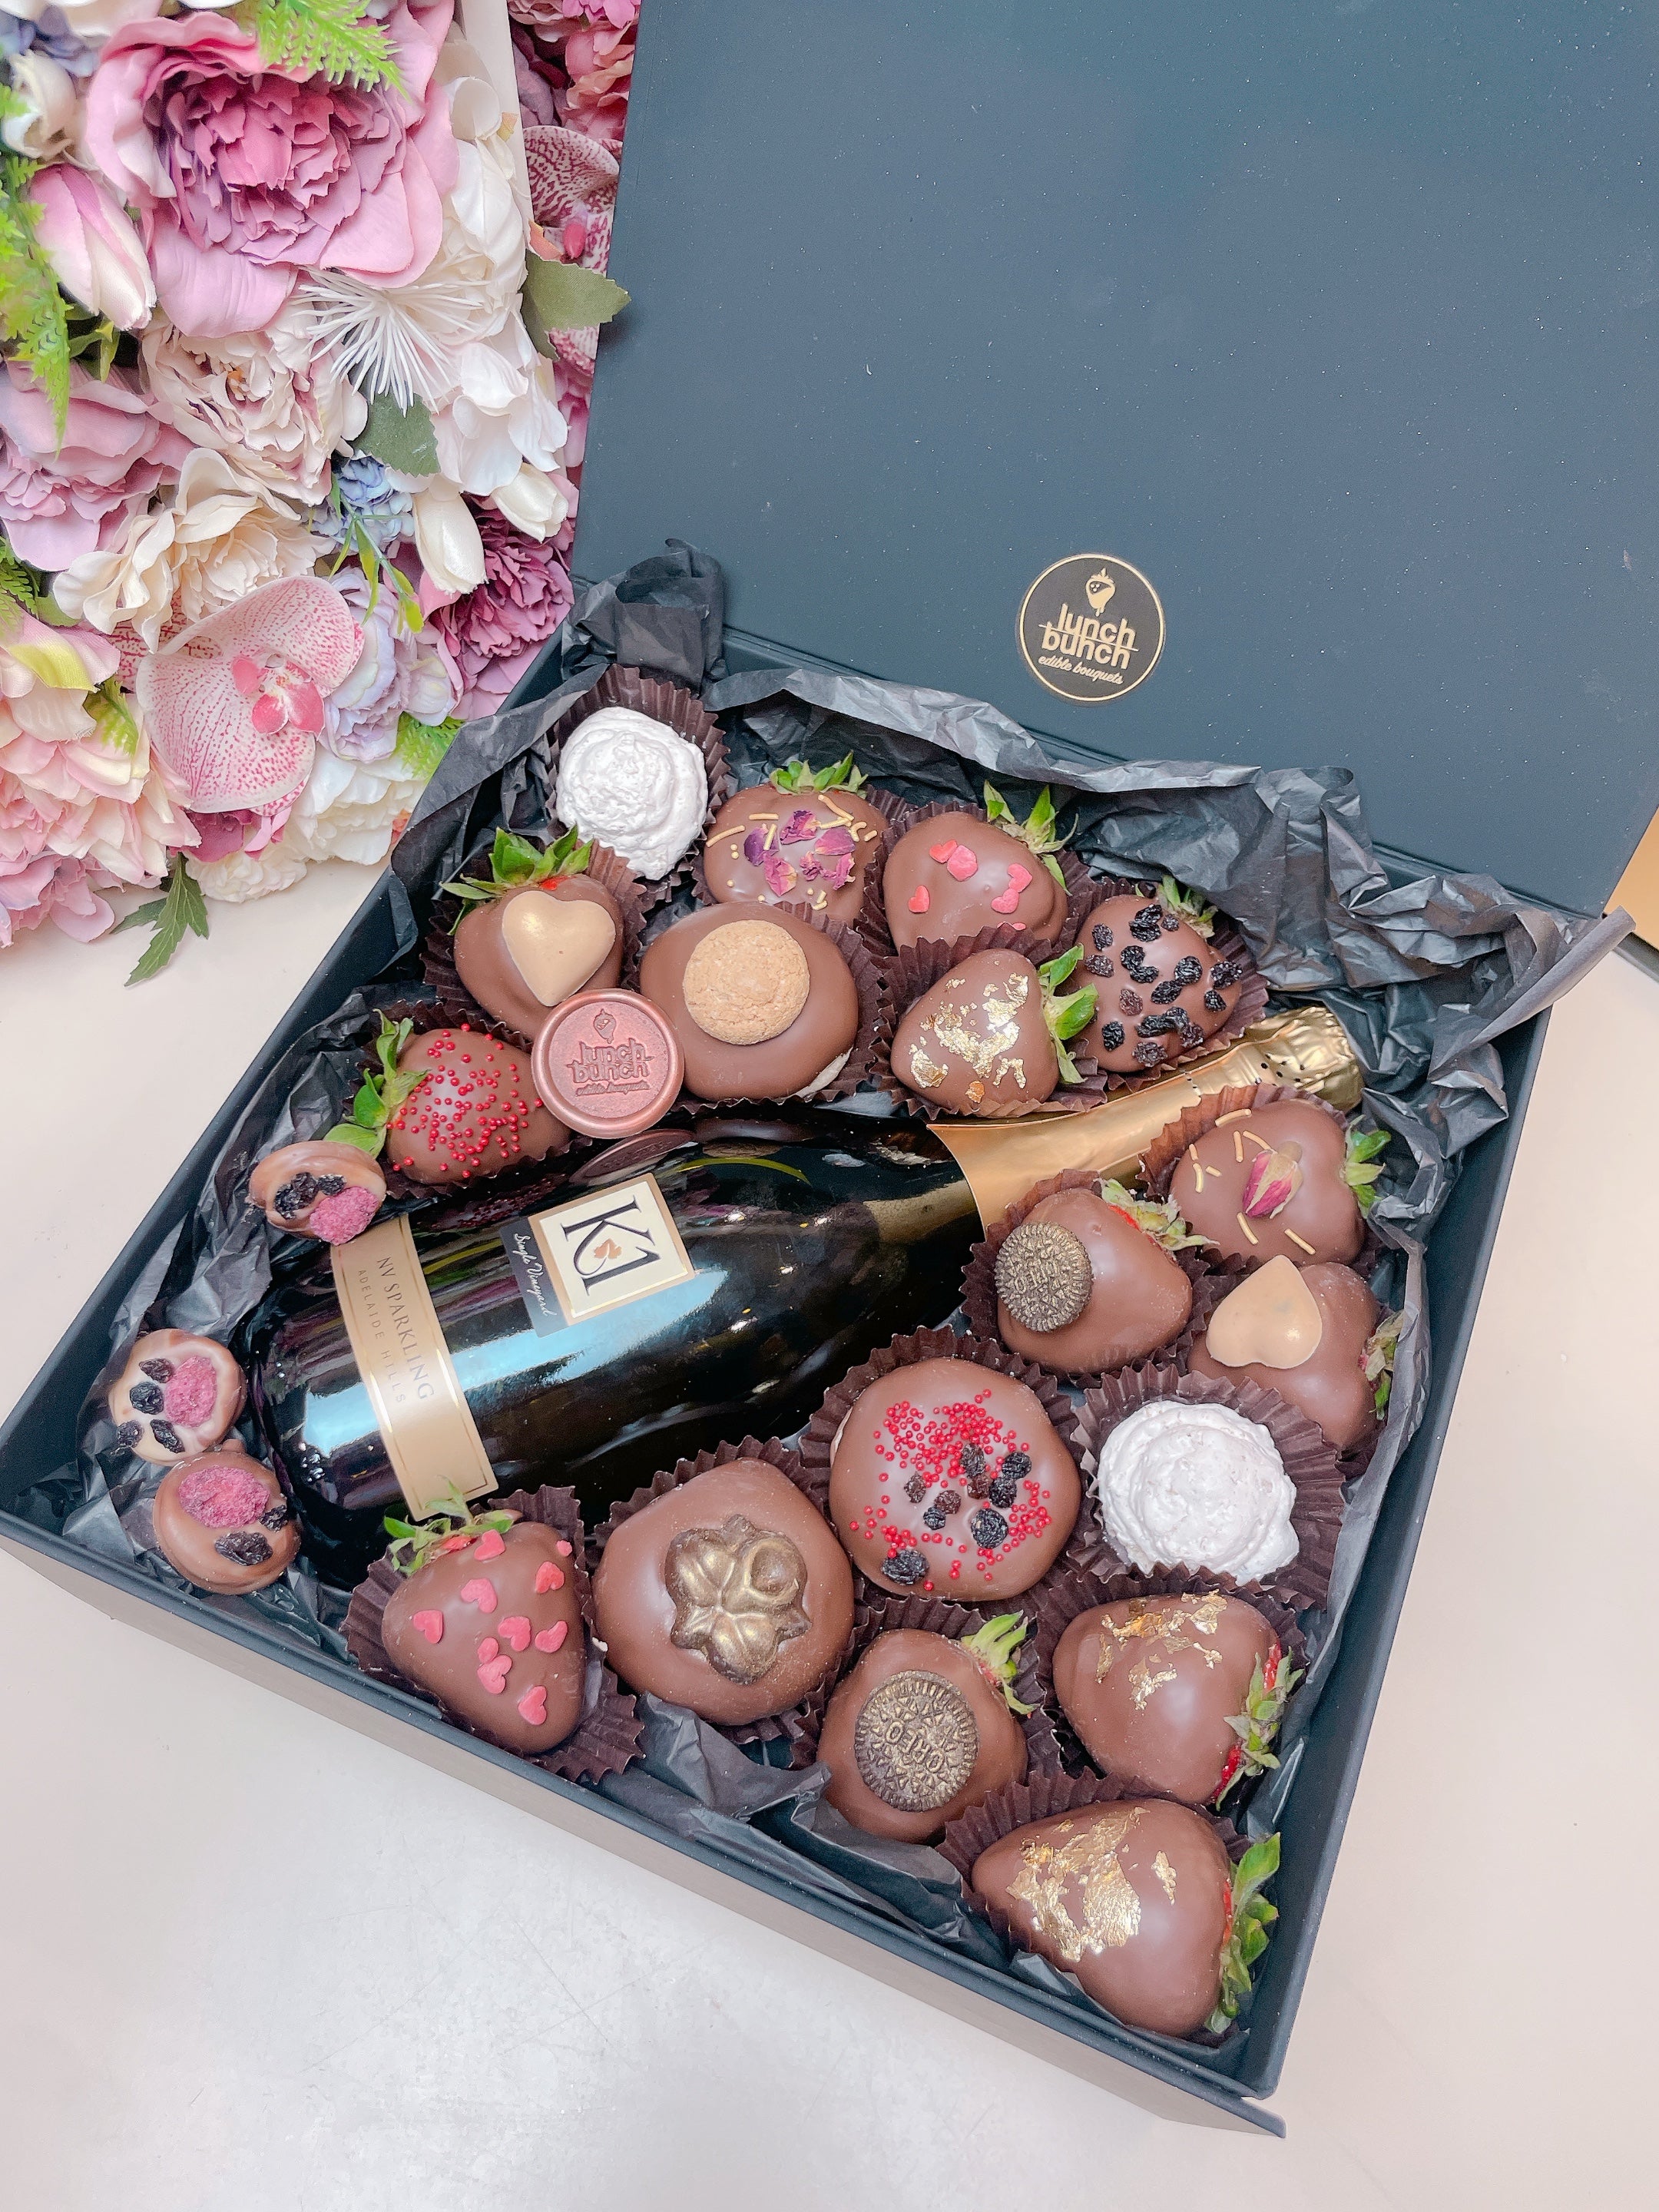 Get your Hamper Box with Same-Day Delivery in Adelaide, Surprise your special someone on Valentine's Day with our exquisite Hamper Box. Our extraordinary selection of the finest local strawberries, freshly baked donuts and the iconic 750ml bottle of Sparkling K1 NV Bottle